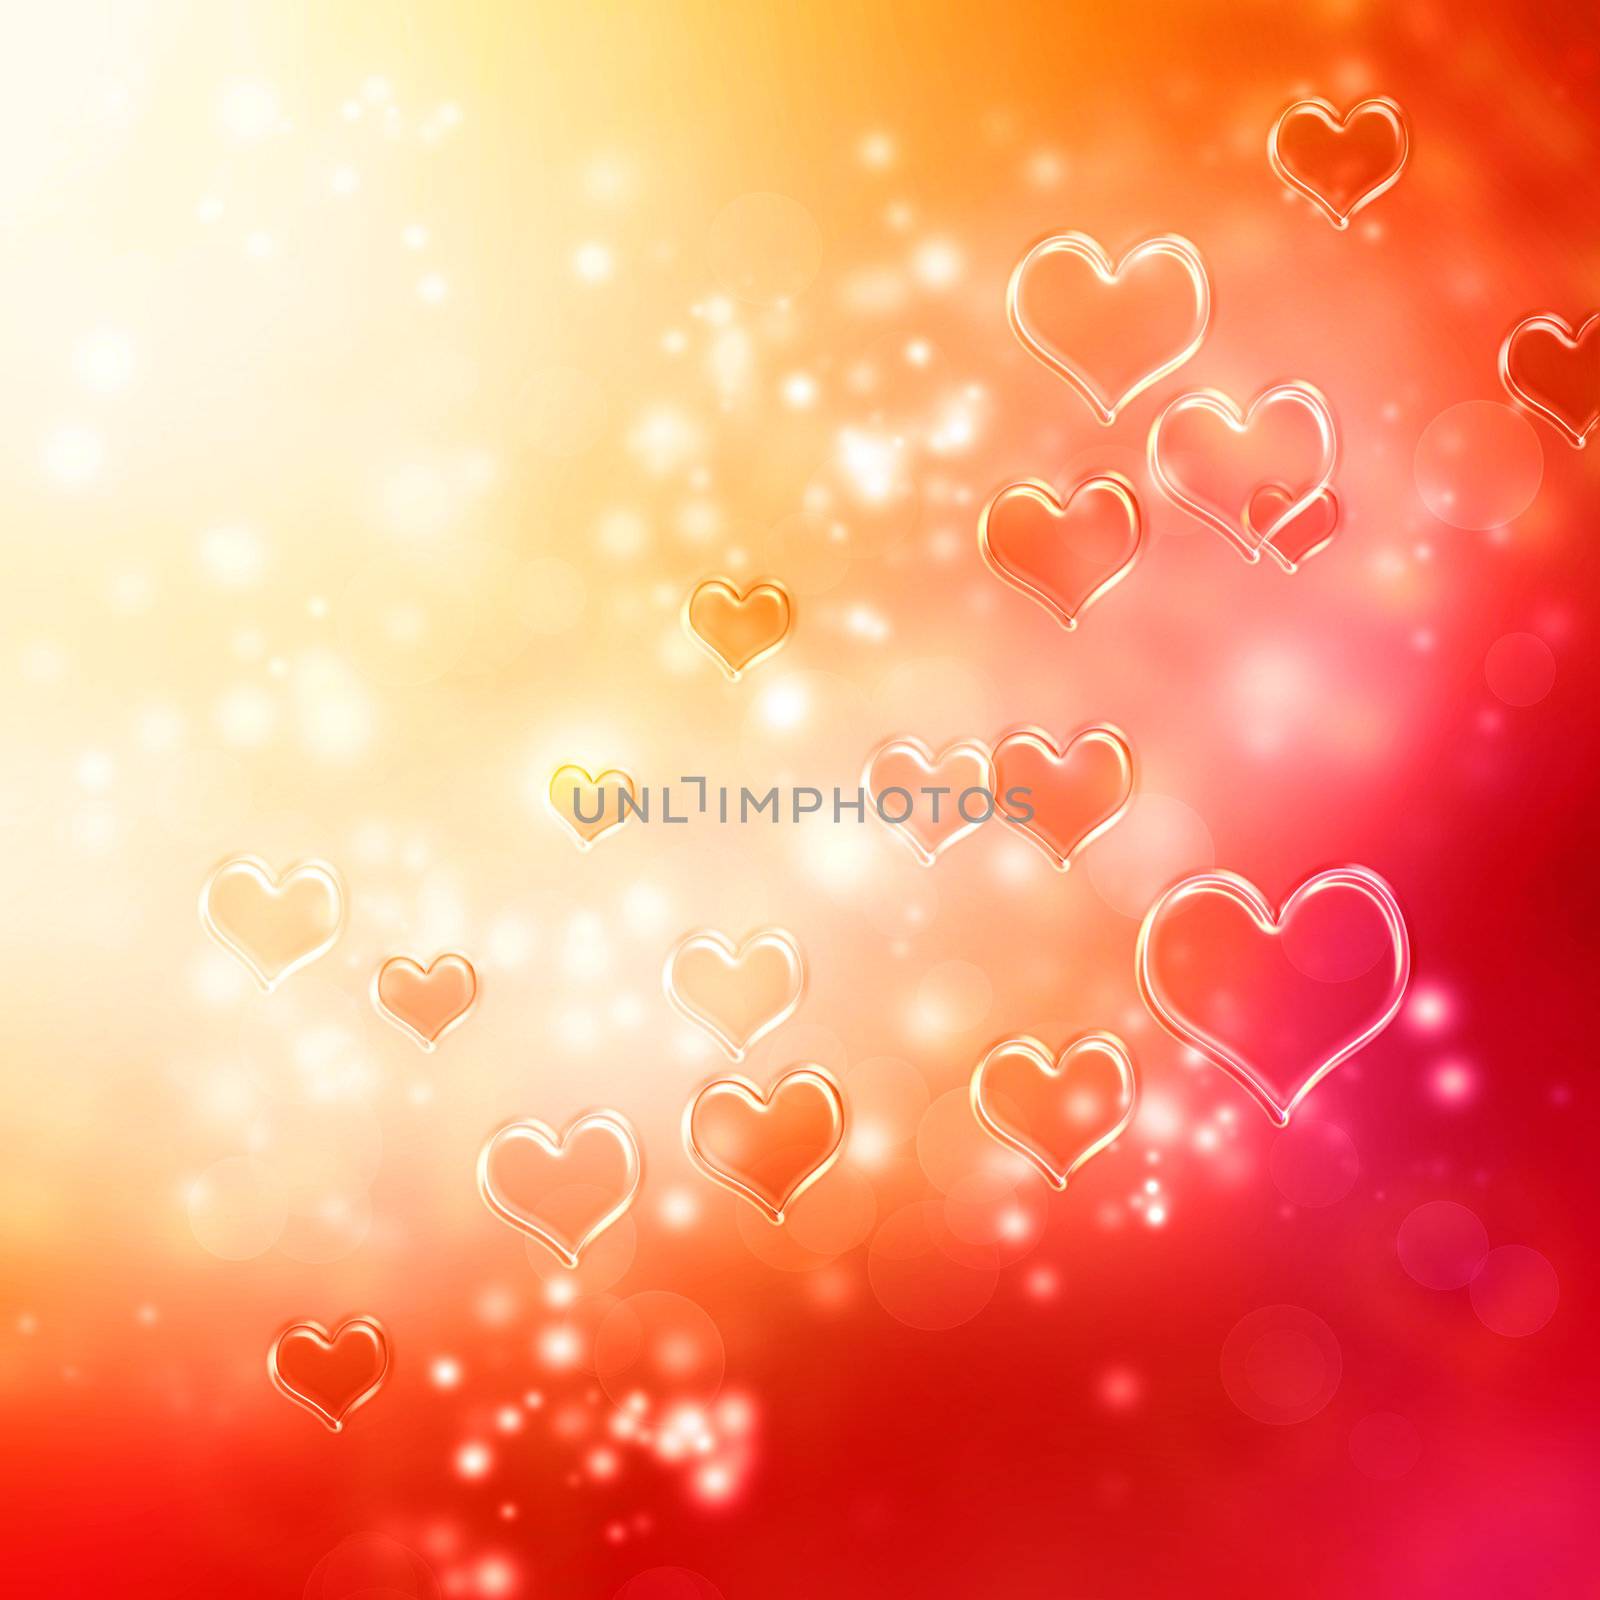 Clear shiny hearts background (red and orange)